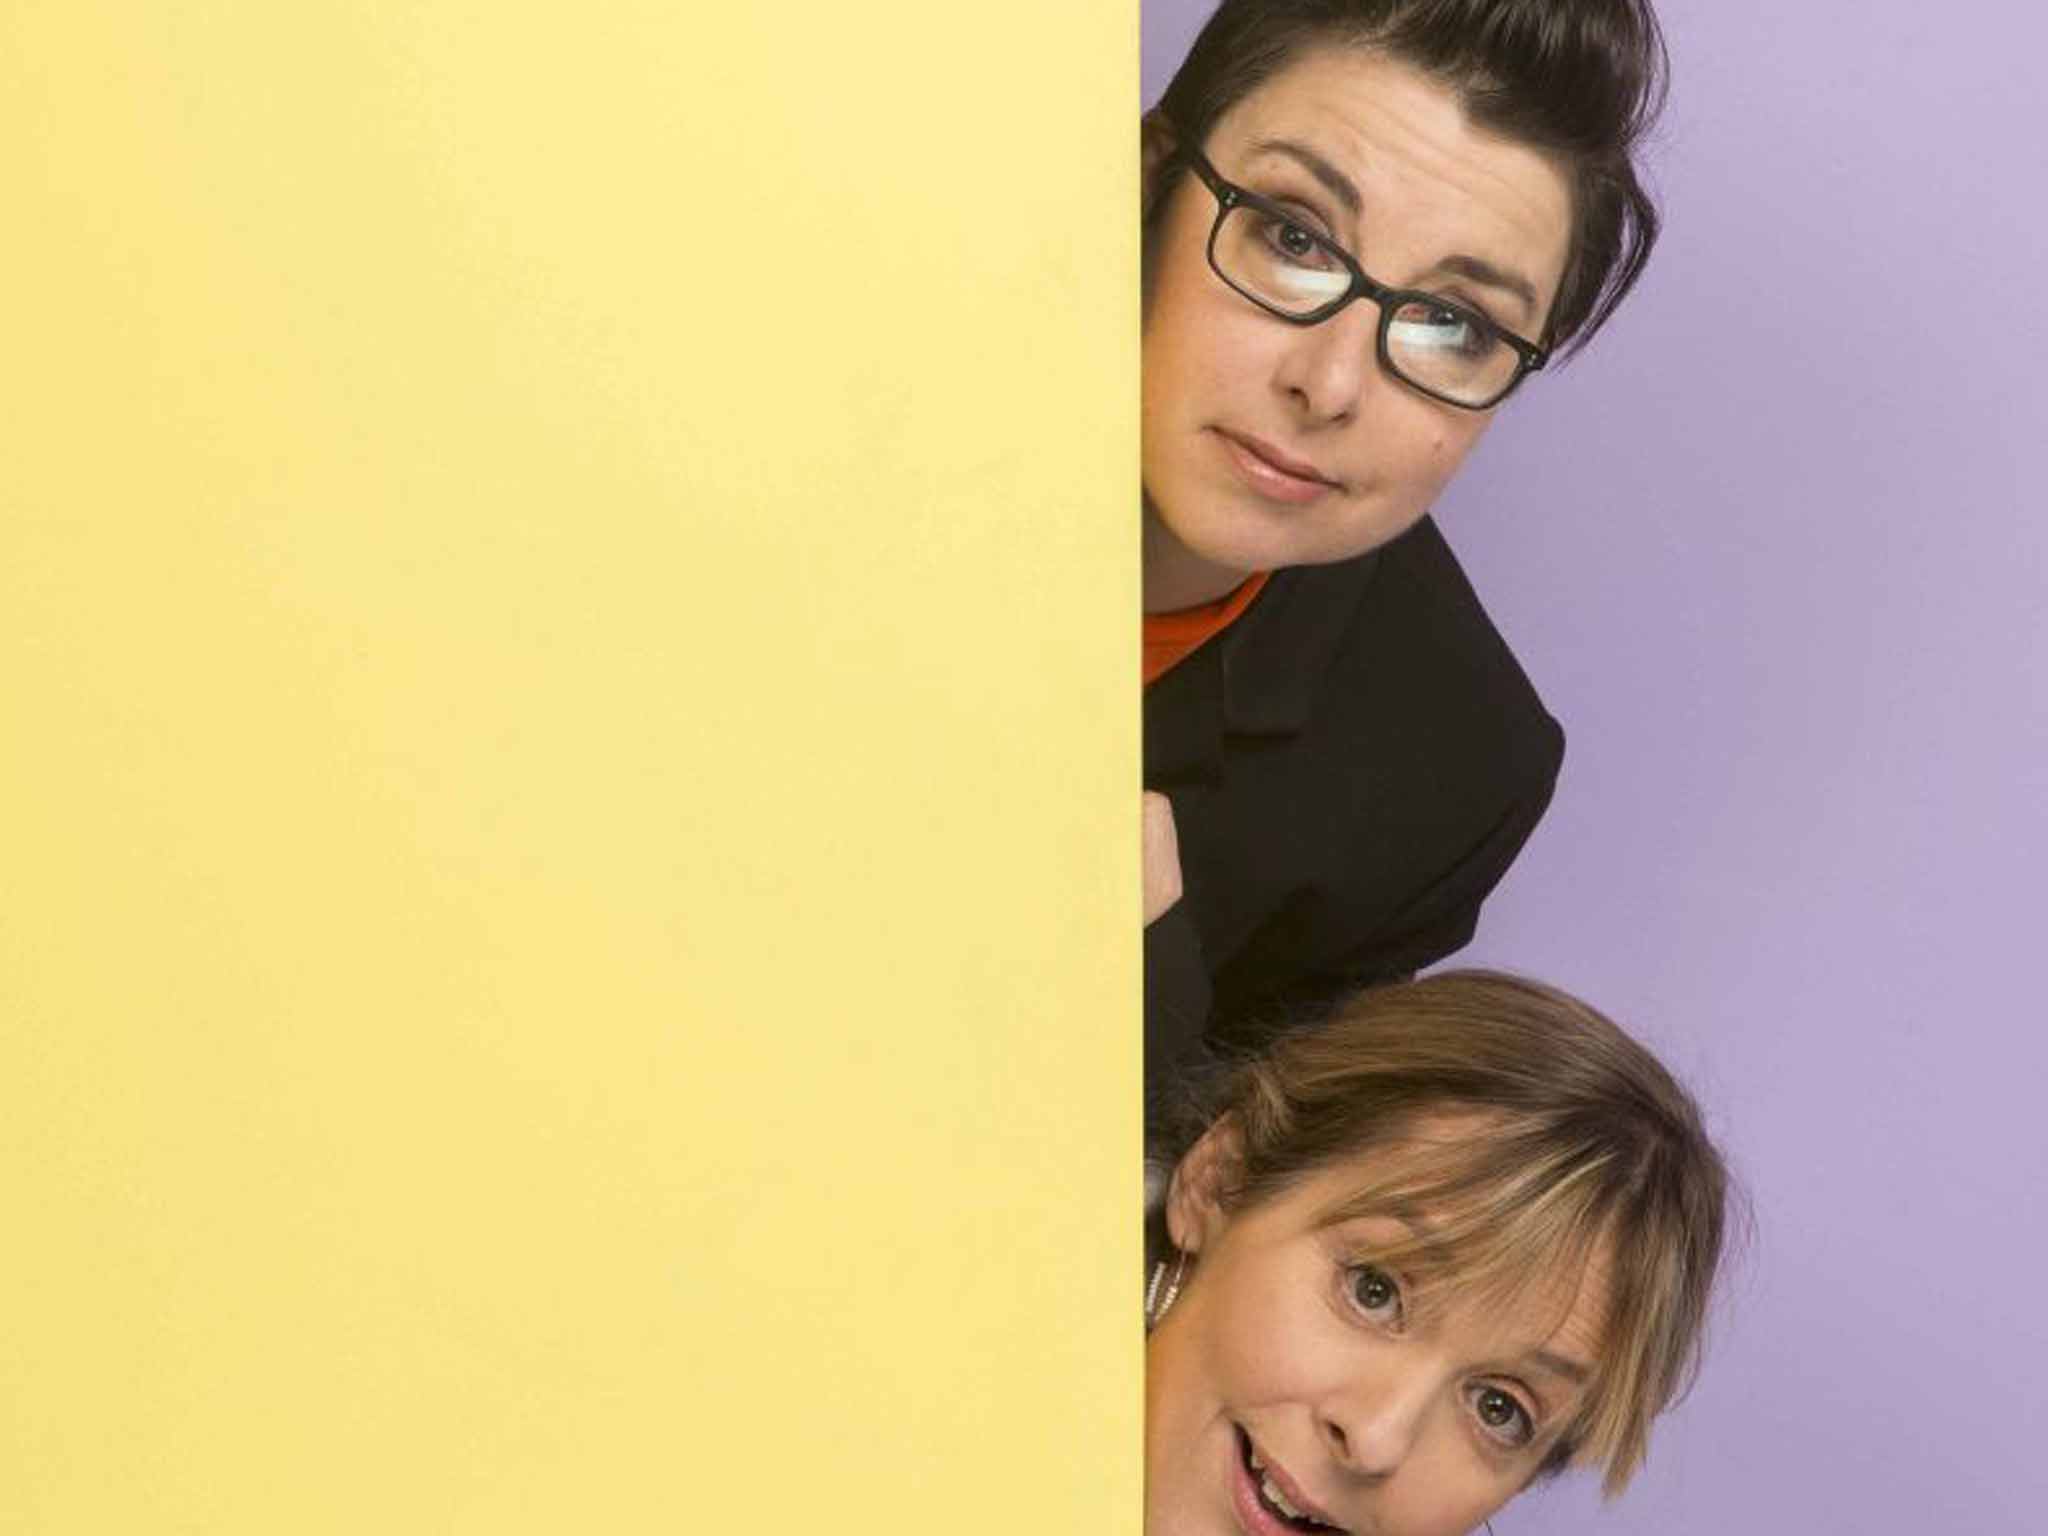 Sister act: Mel Giedroyc and Sue Perkins in their new daily chat show, 'Mel and Sue'